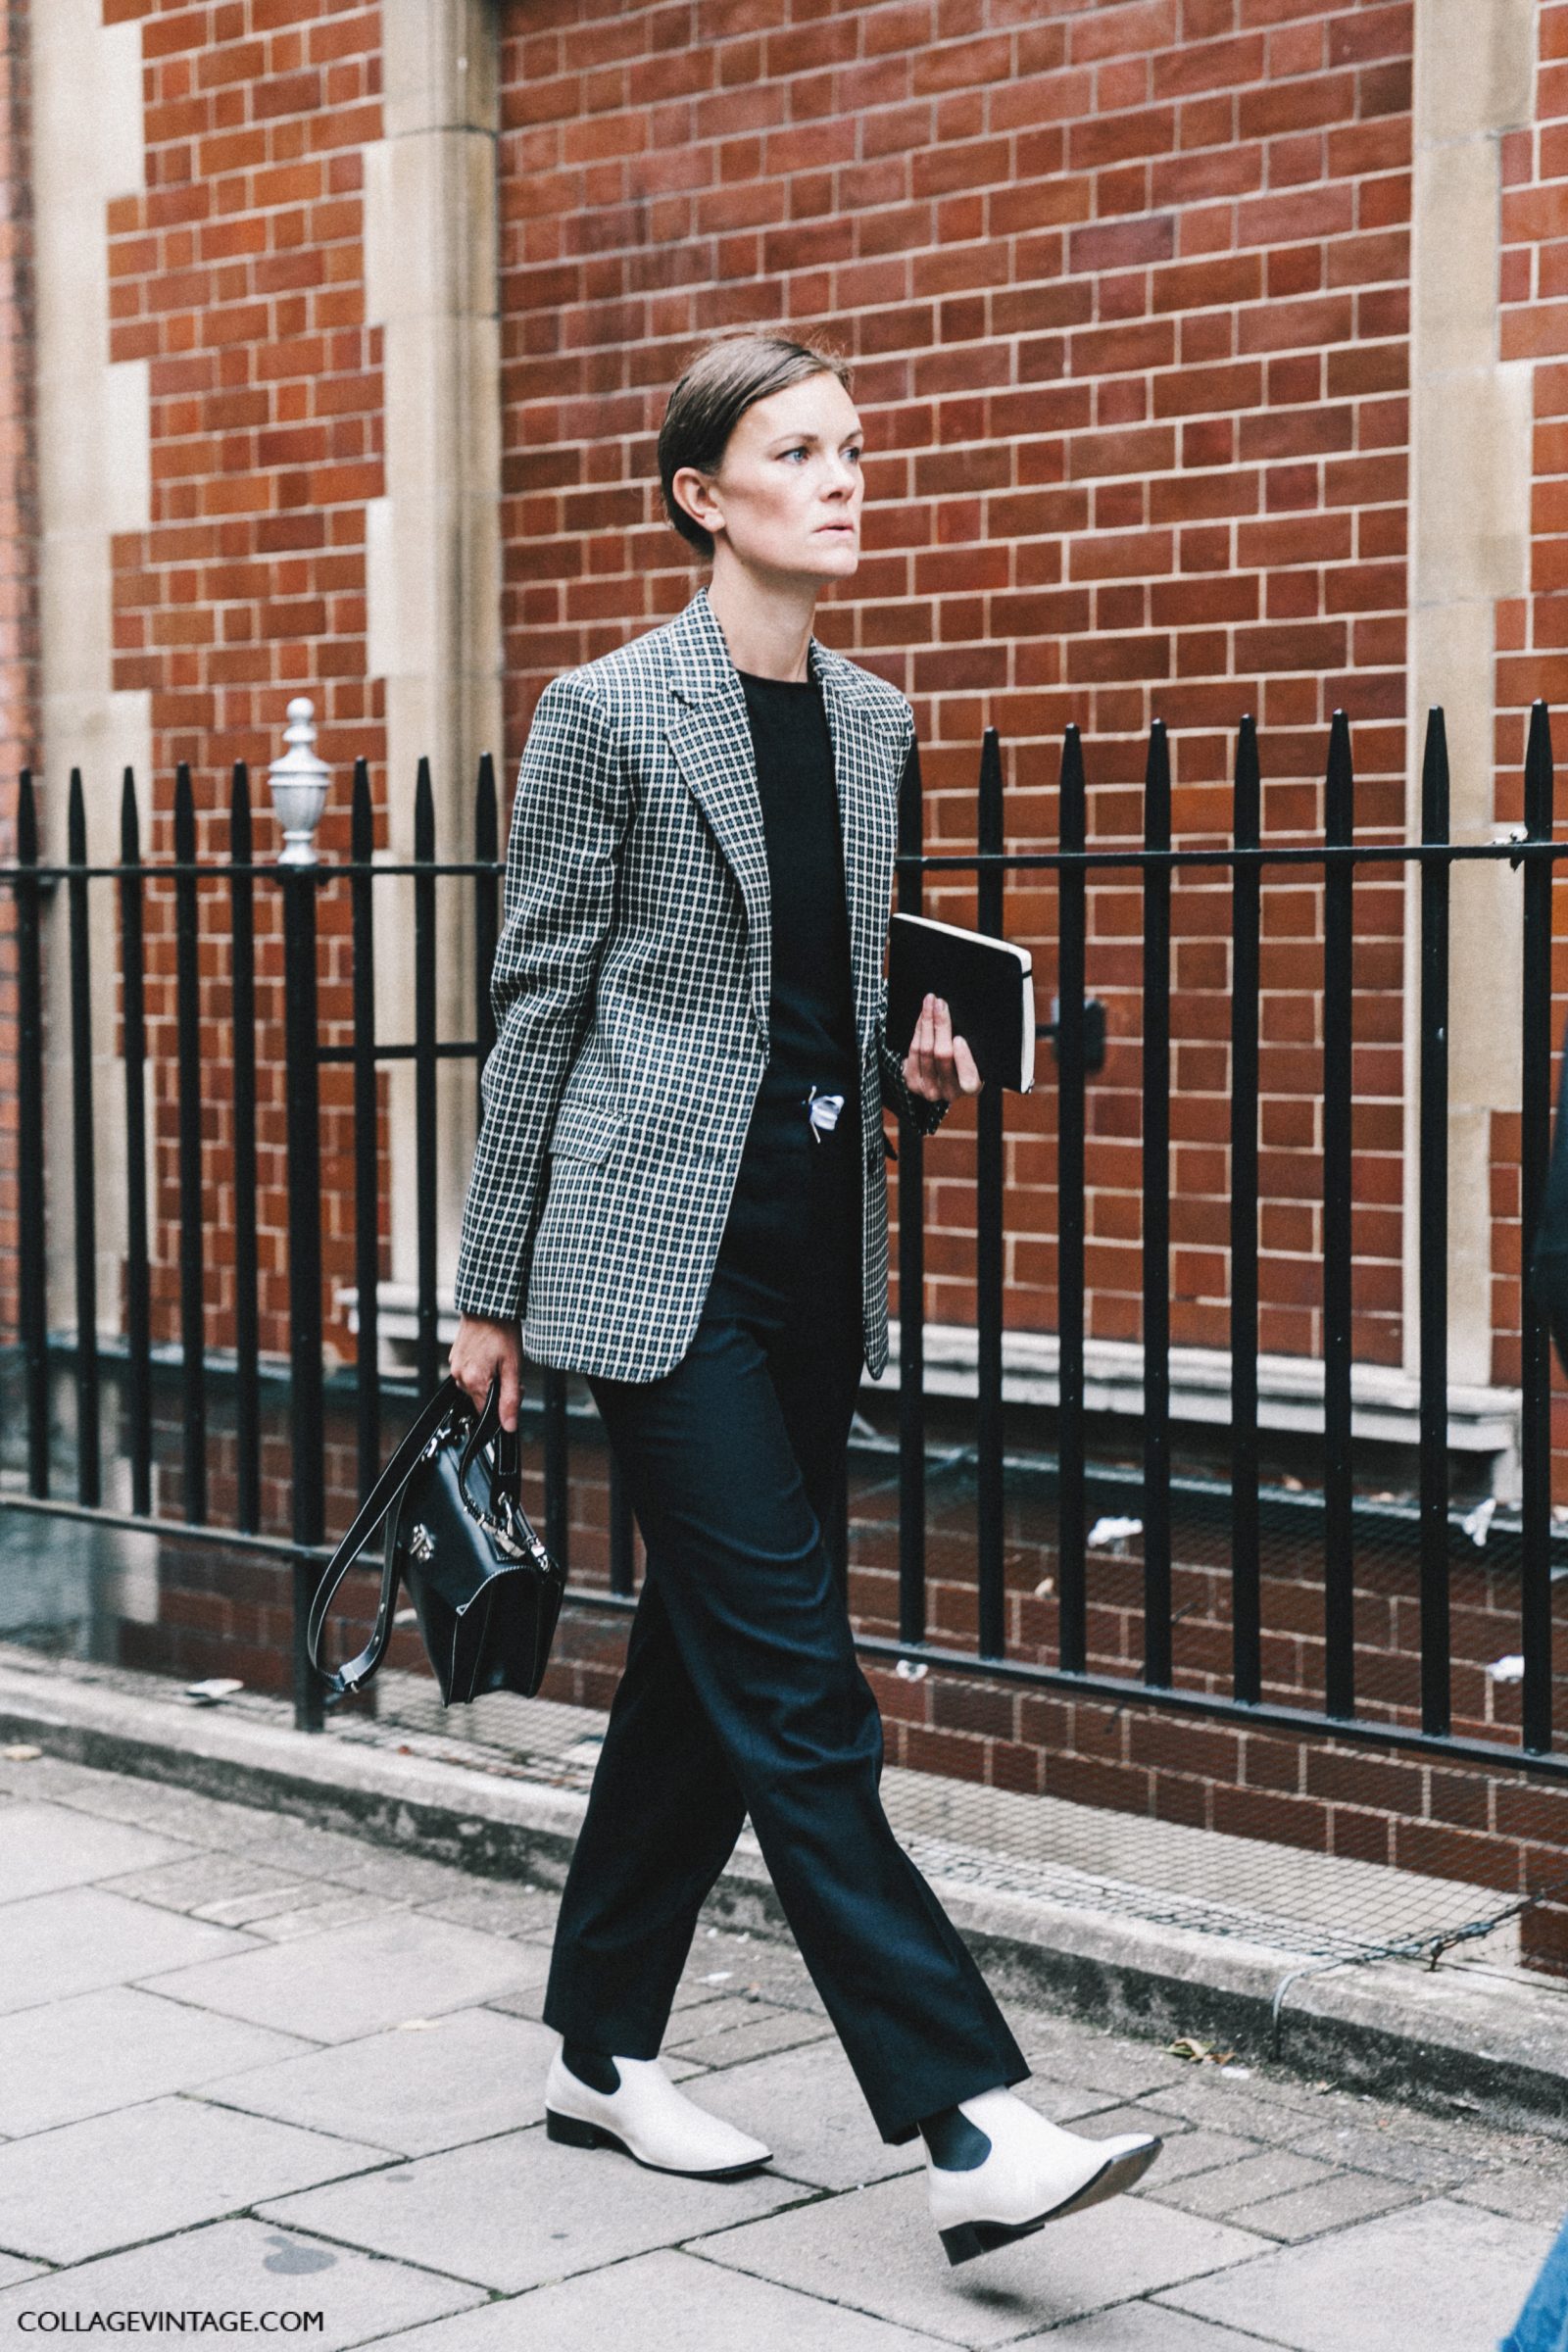 lfw-london_fashion_week_ss17-street_style-outfits-collage_vintage-vintage-jw_anderson-house_of_holland-40-1600x2400